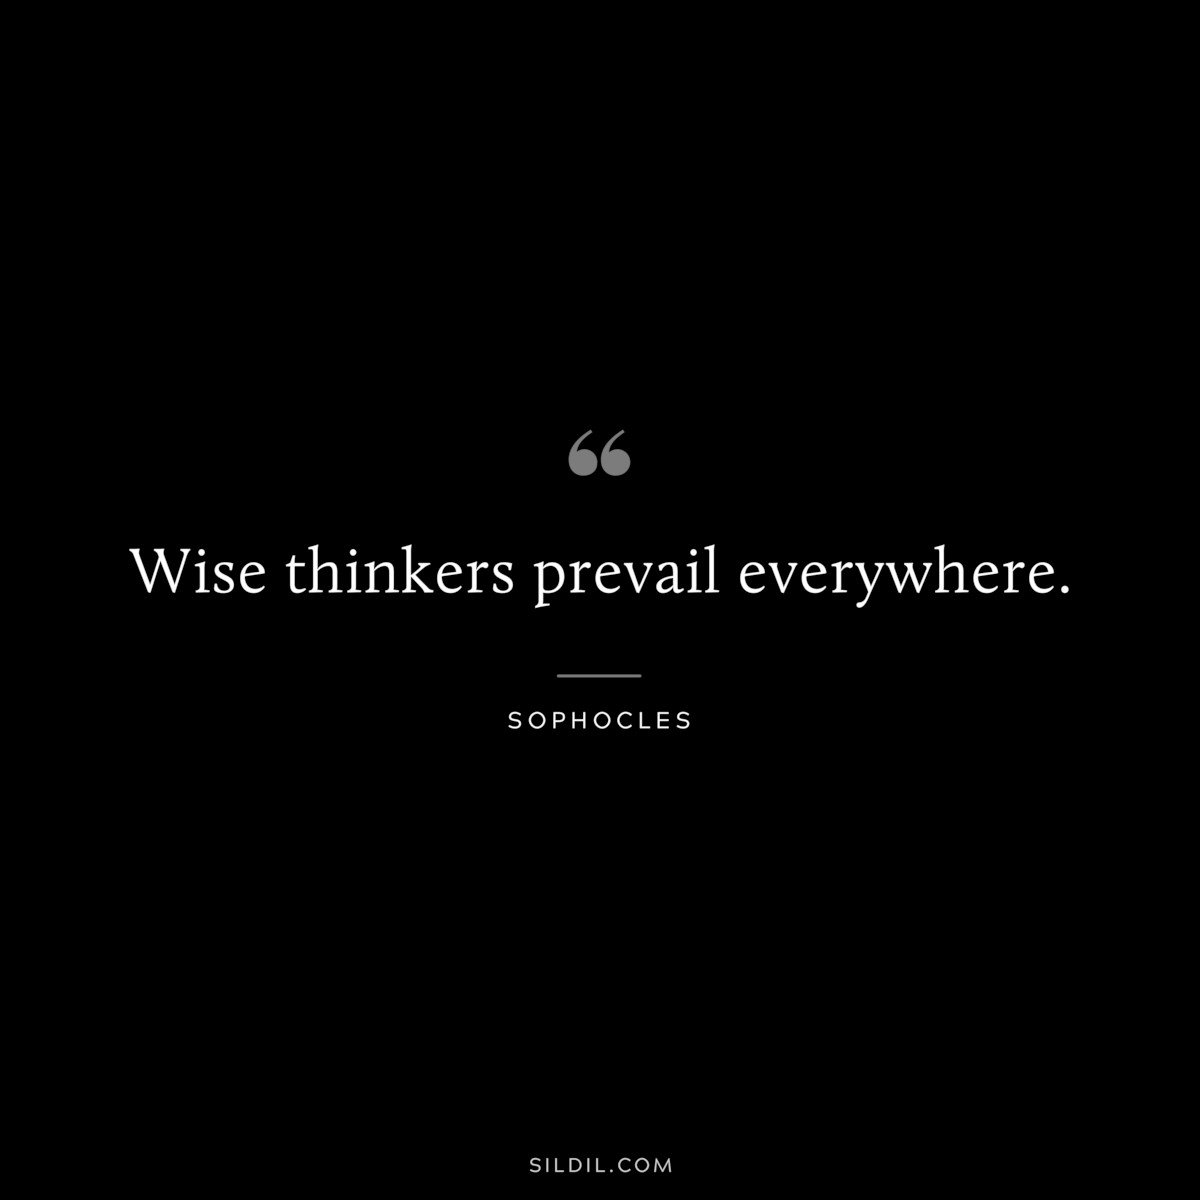 Wise thinkers prevail everywhere. ― Sophocles